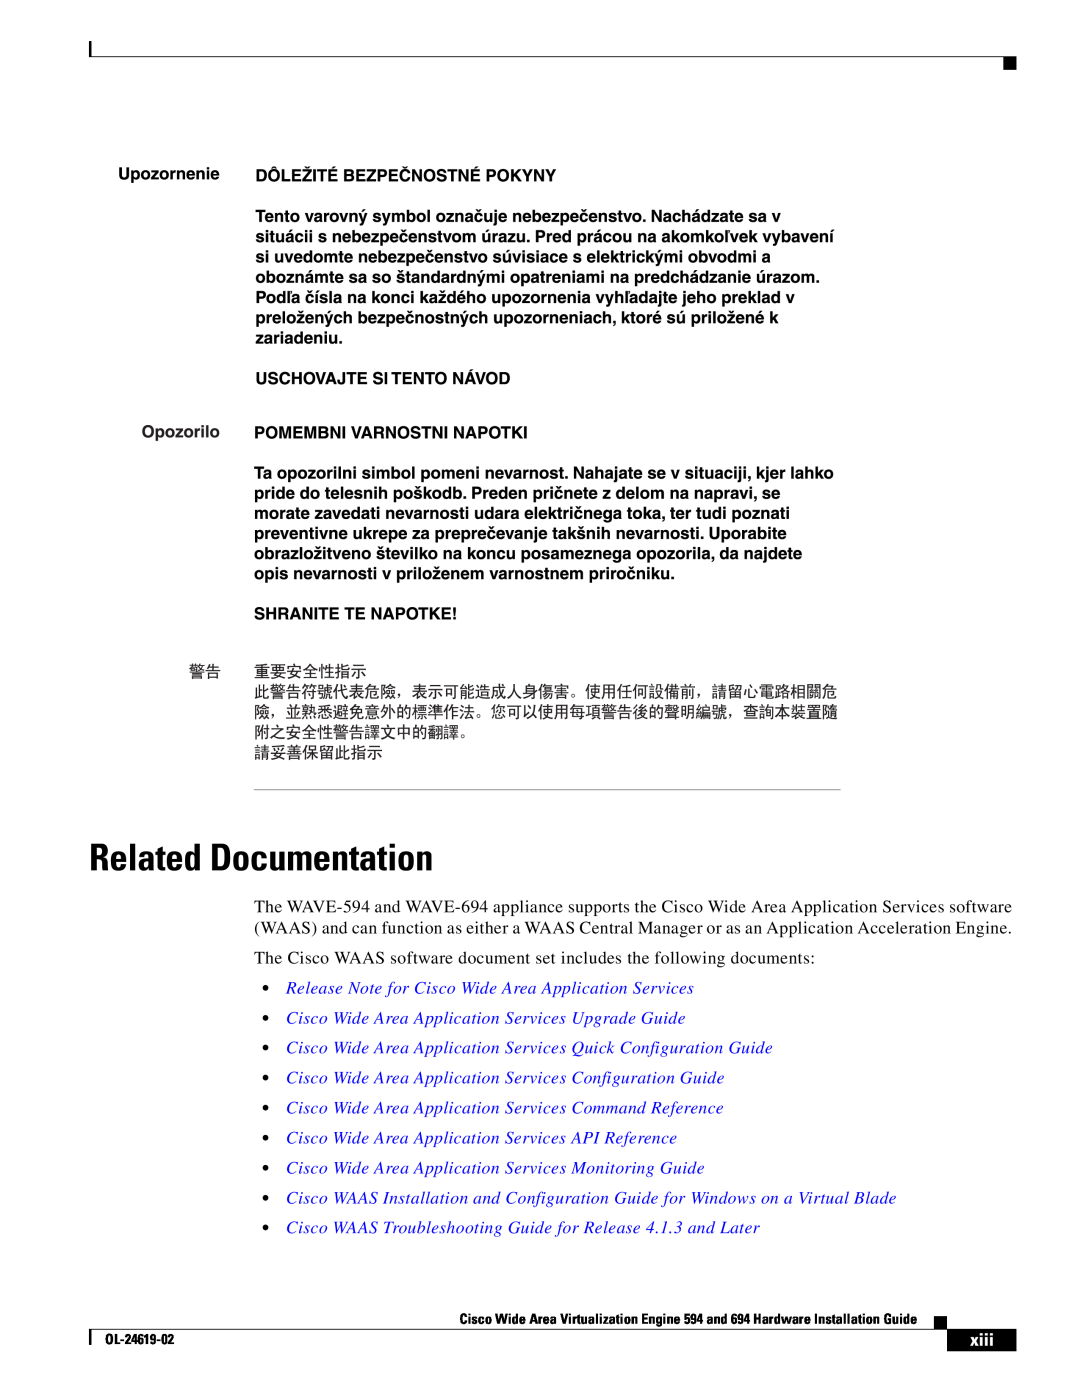 Cisco Systems 694 manual Related Documentation, xiii, The Cisco WAAS software document set includes the following documents 